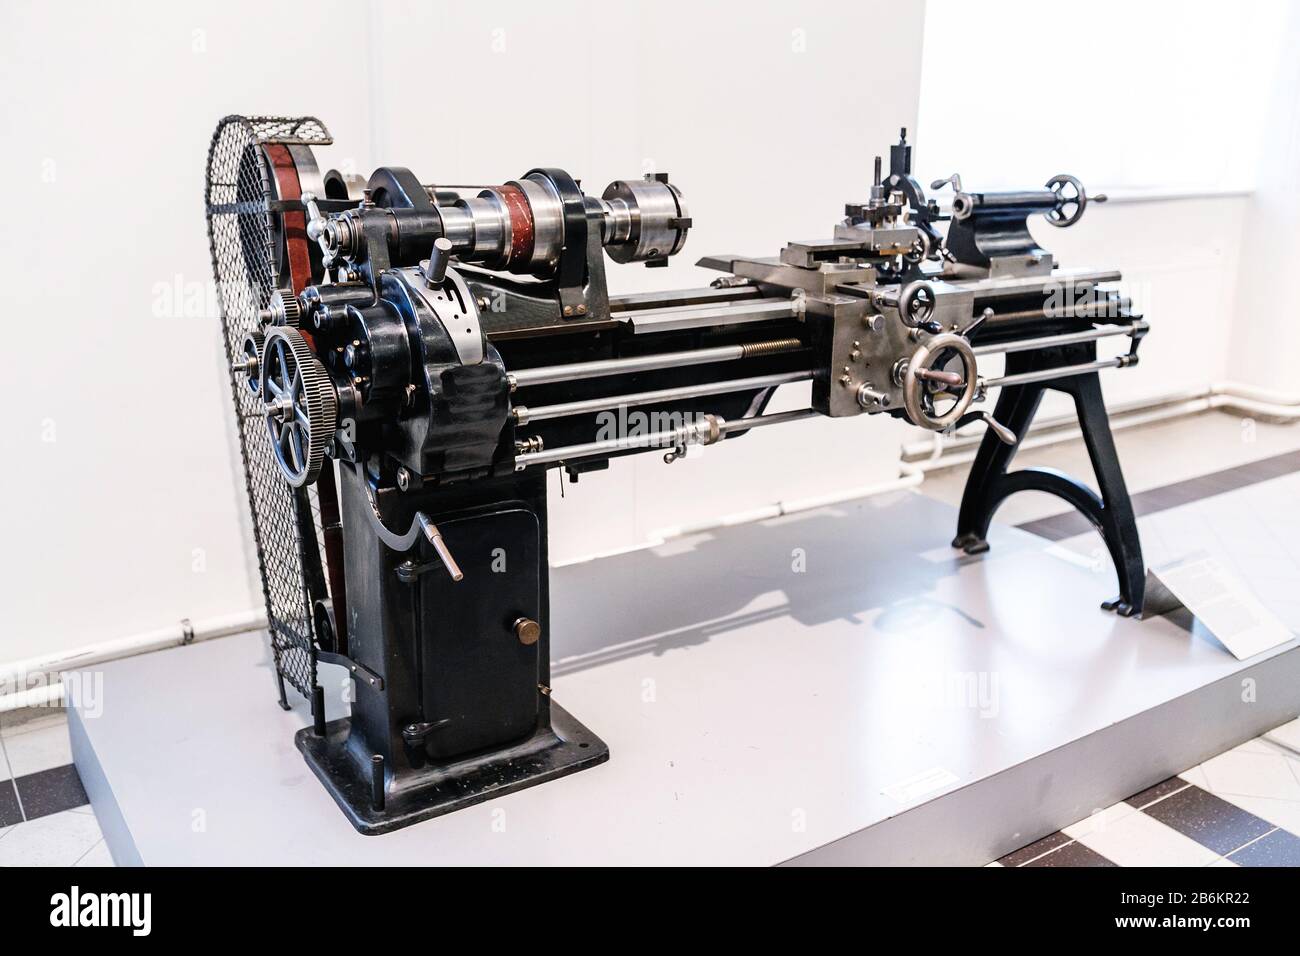 The old lathe machine tool equipment for various metal work Stock Photo -  Alamy